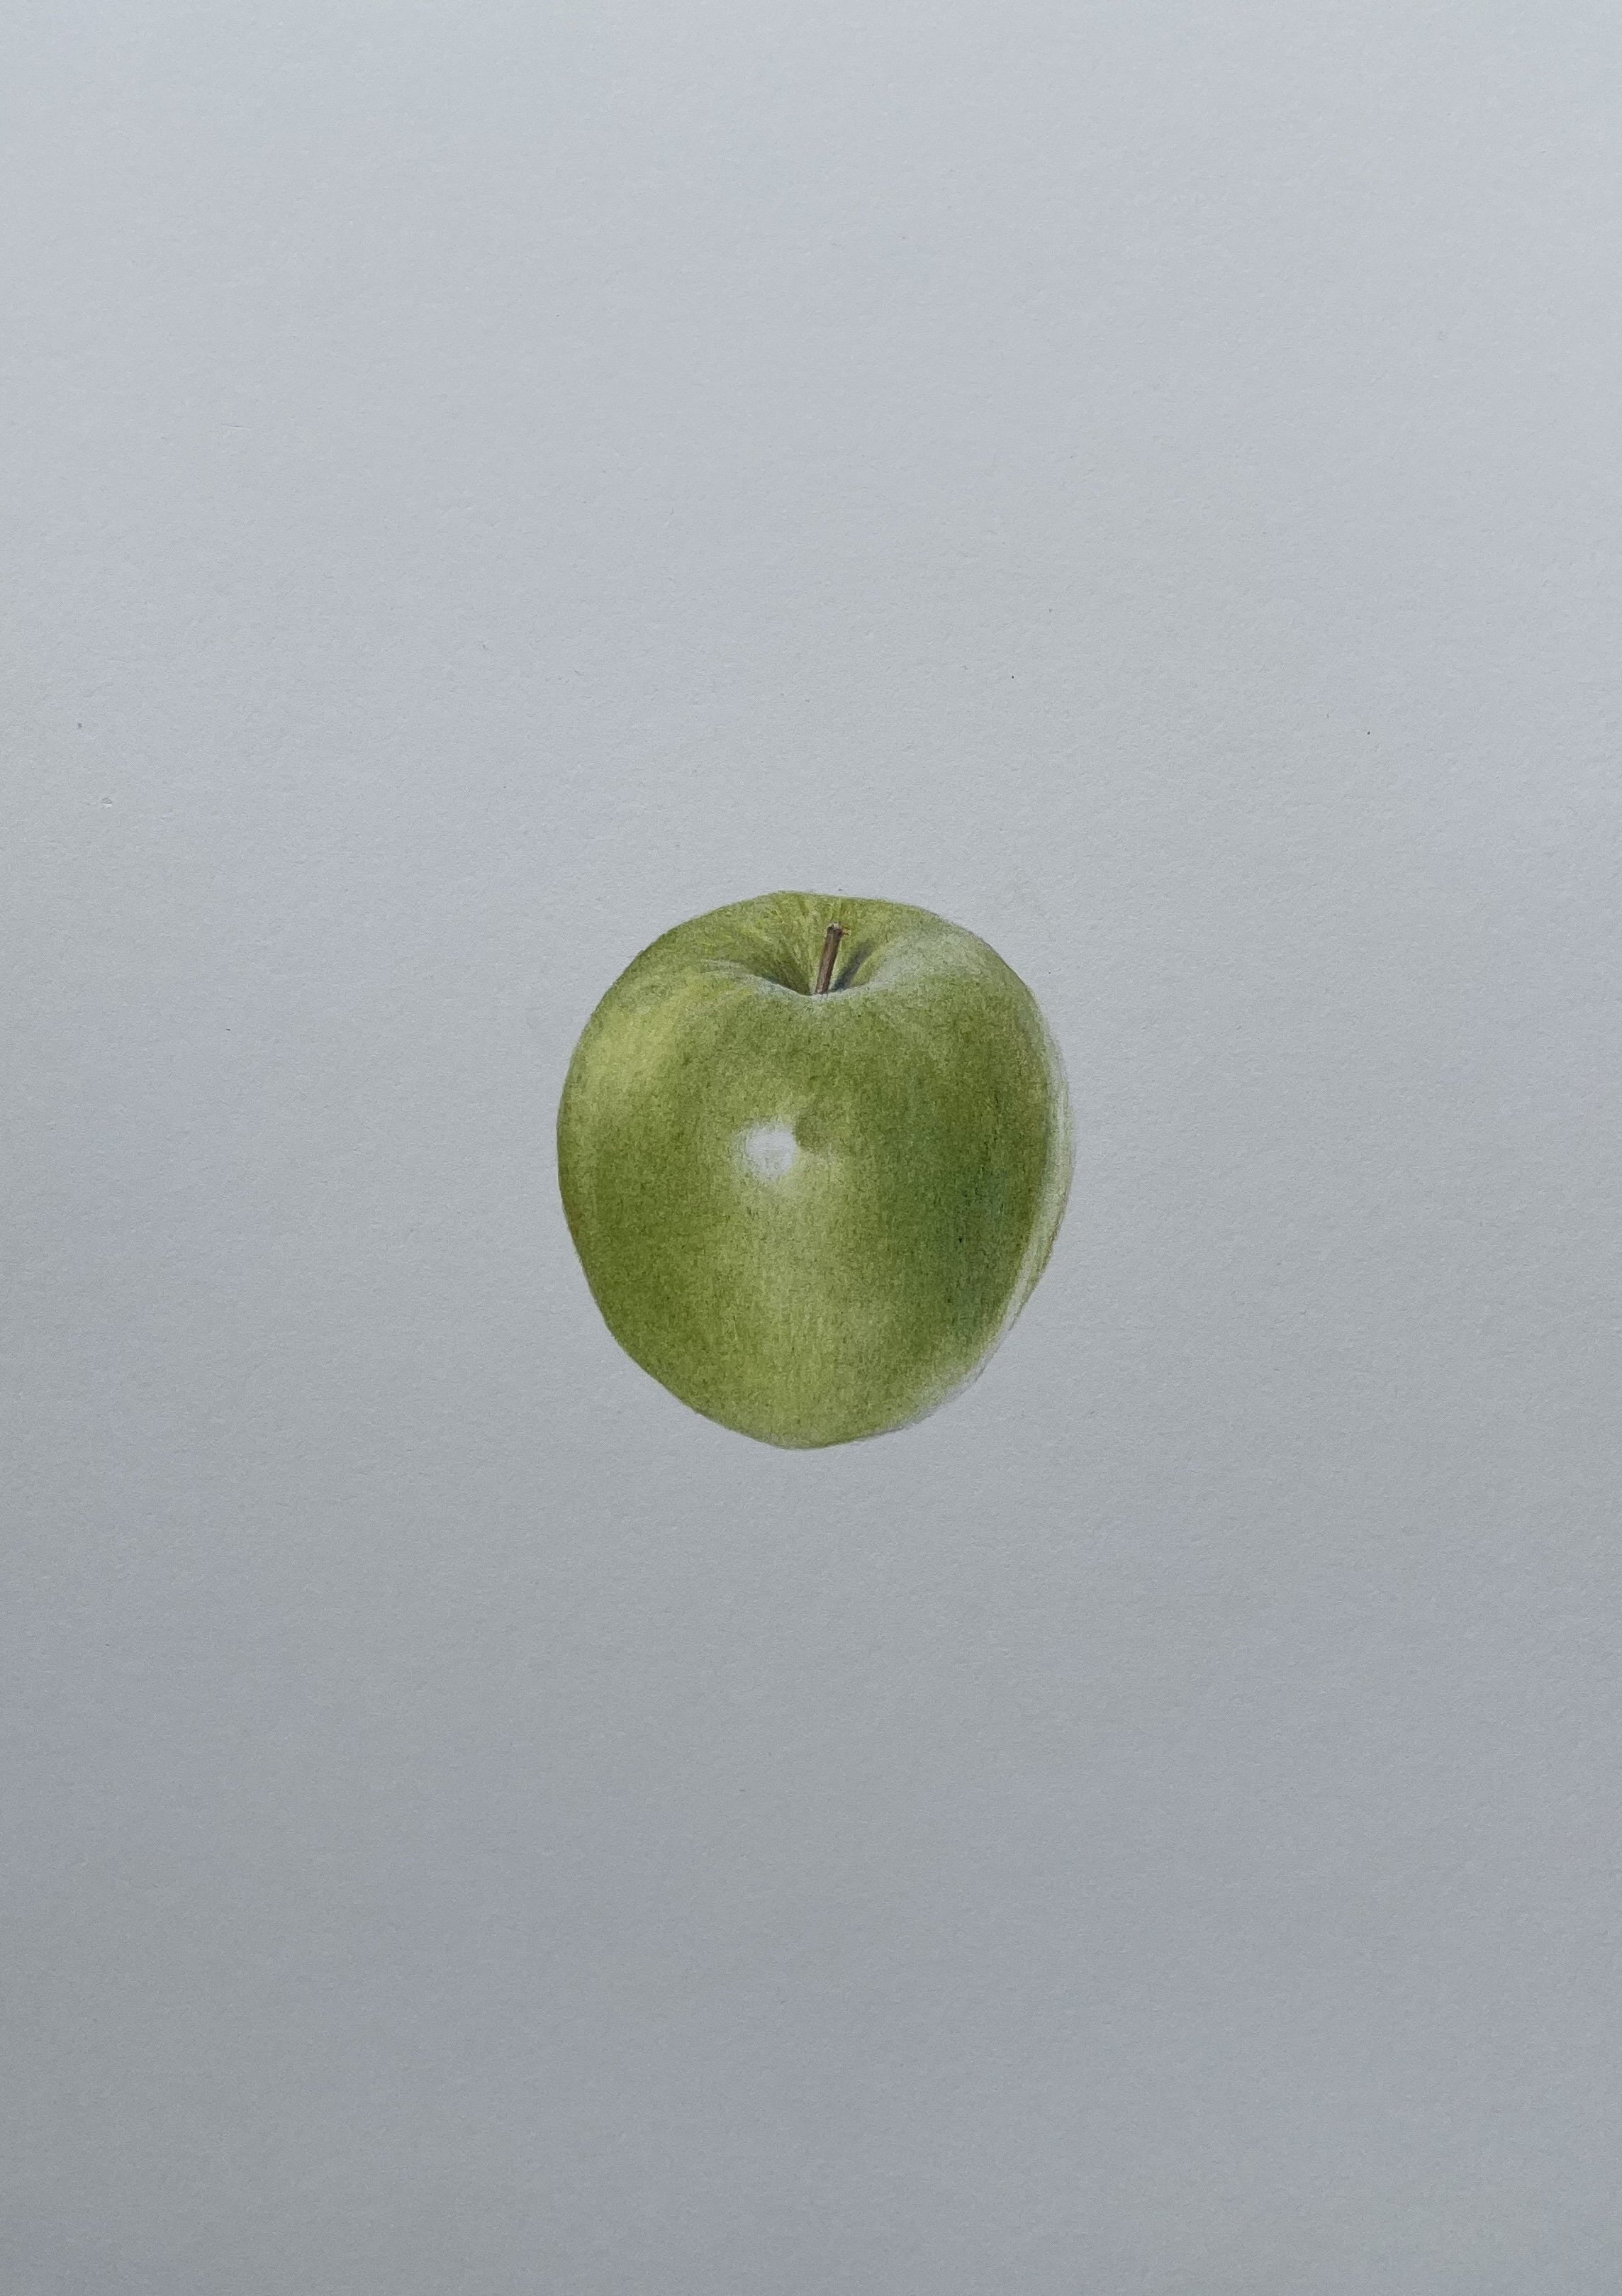   Apple   Colored pencil on paper  10 in x 14 in 